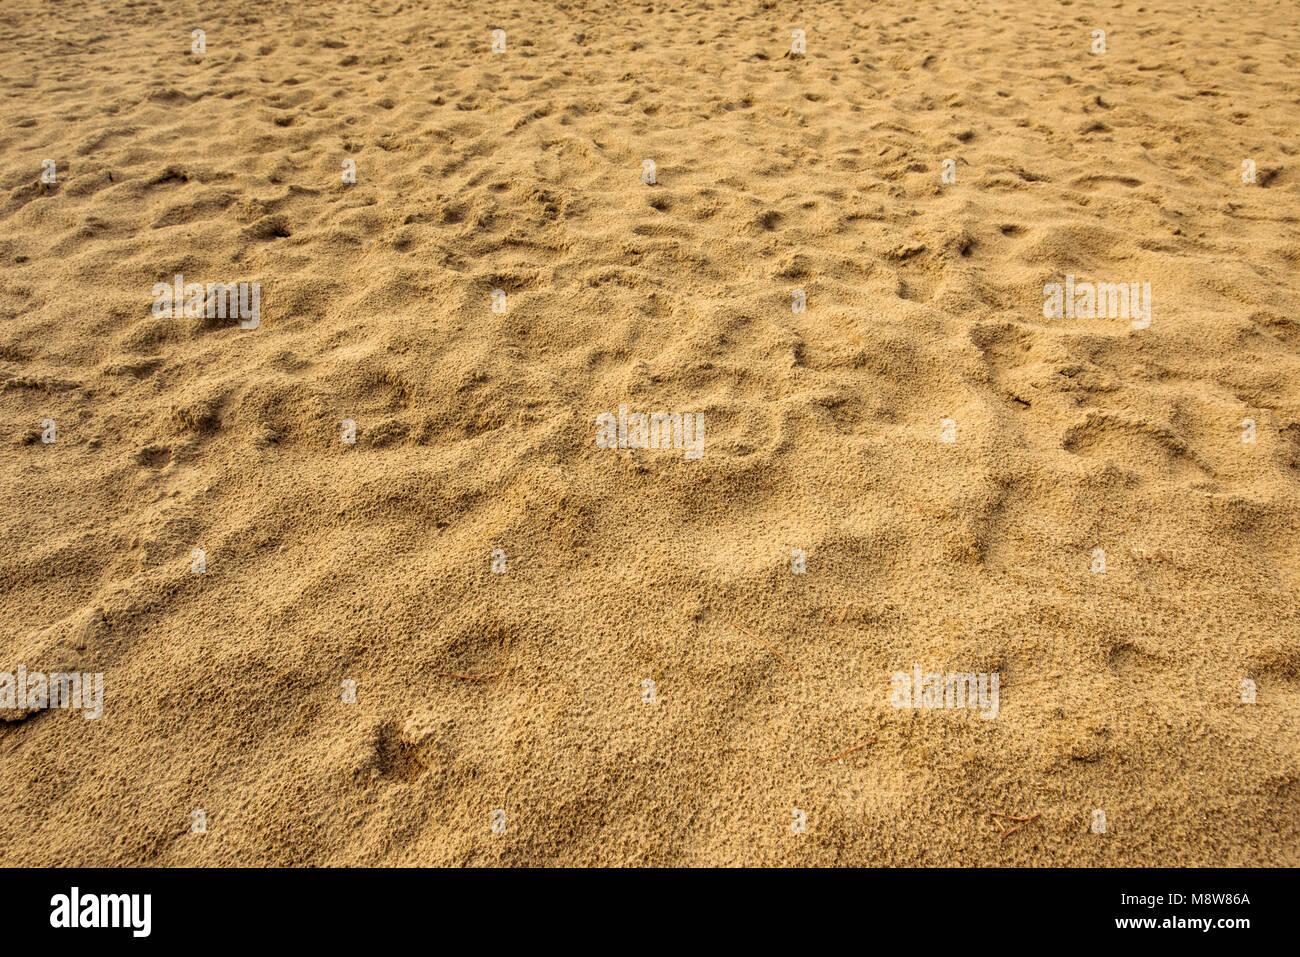 Footprints in the wet beach sand, diminishing perspective background Stock Photo